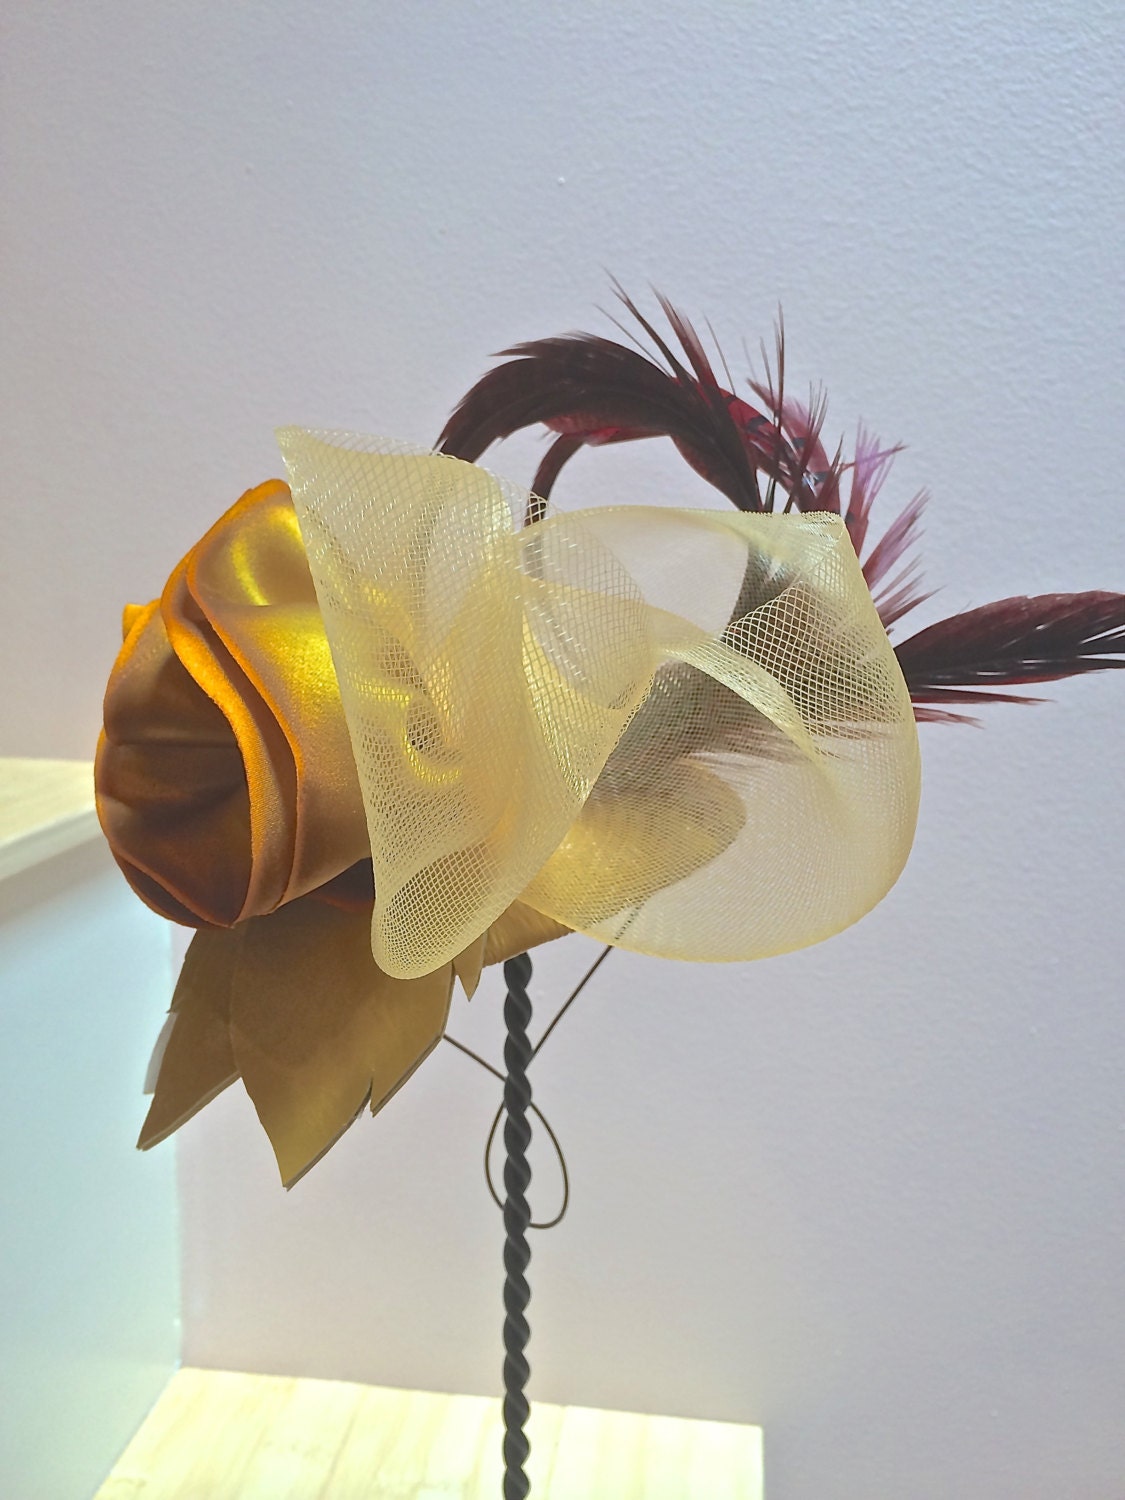 Yellow Patent Leather Fascinator, Headpiece with Yellow Silk ribbon and Red feathers, Summer Party Hat! Wedding hat or Cocktail Evening Hat.